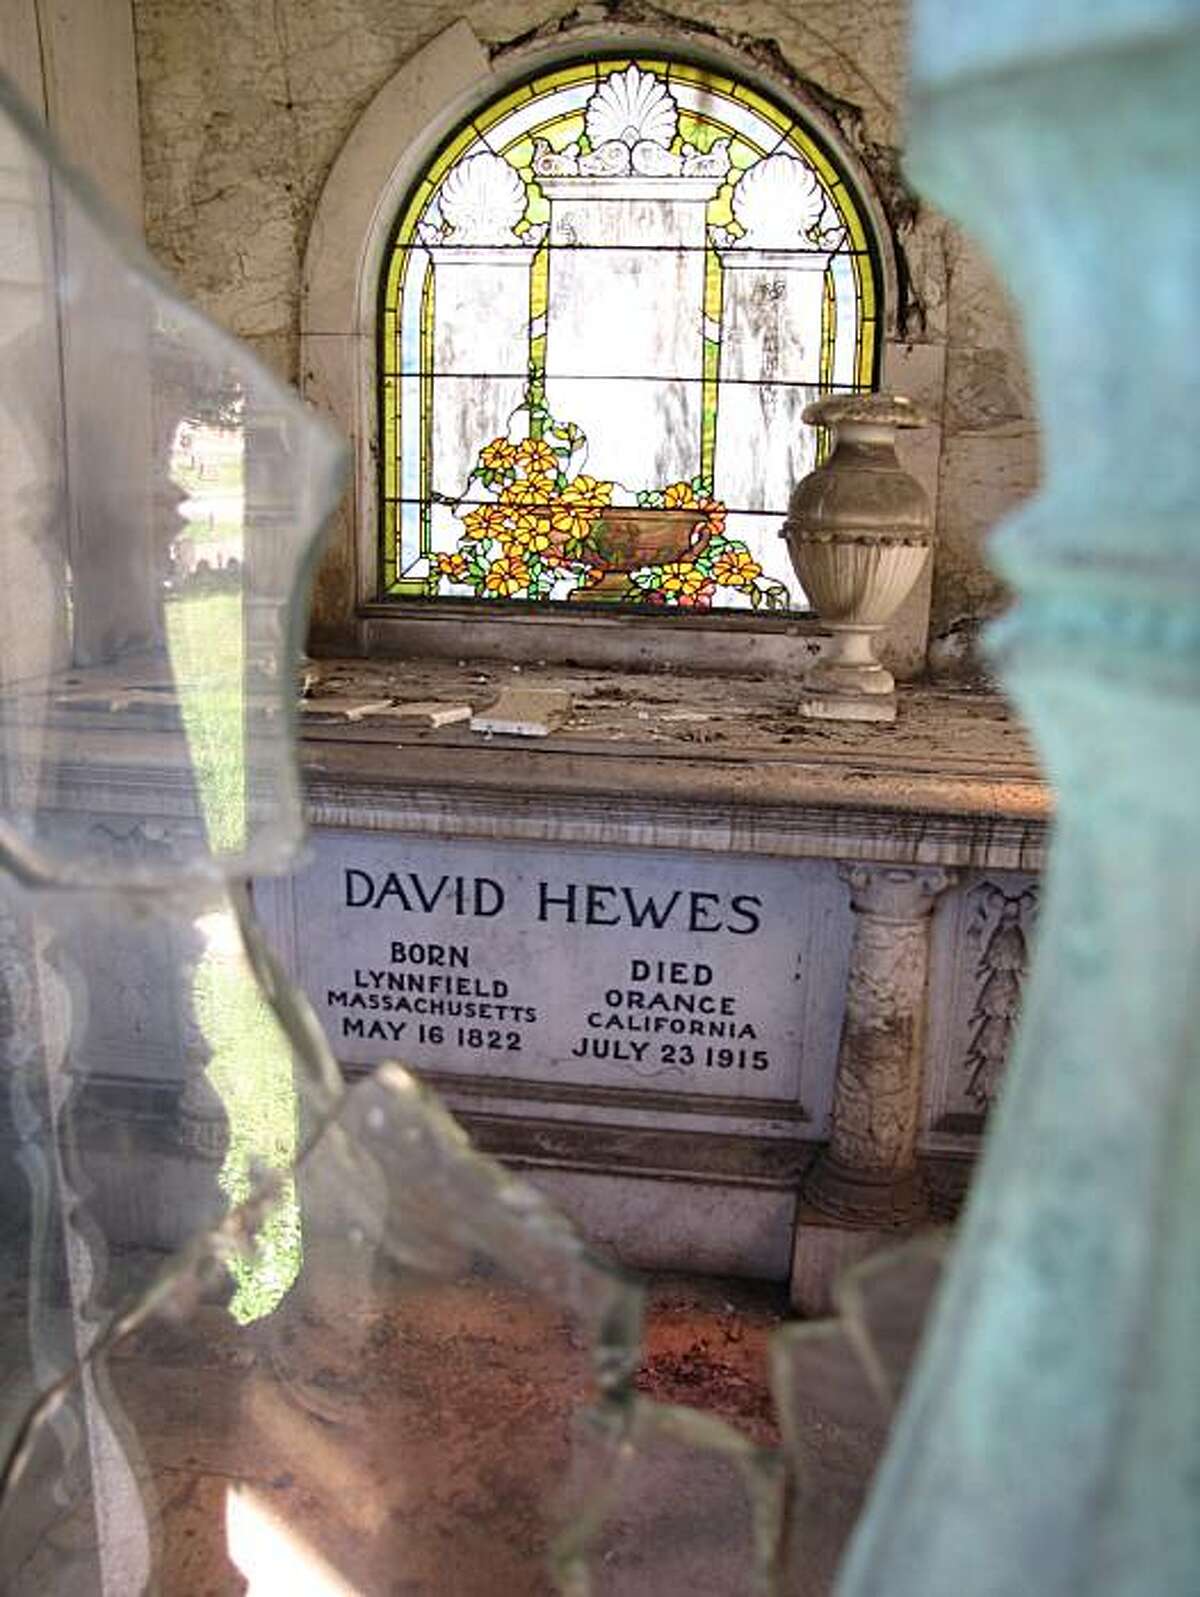 David Hewes' grave is at Mountain View Cemetery in Oakland, Calif.